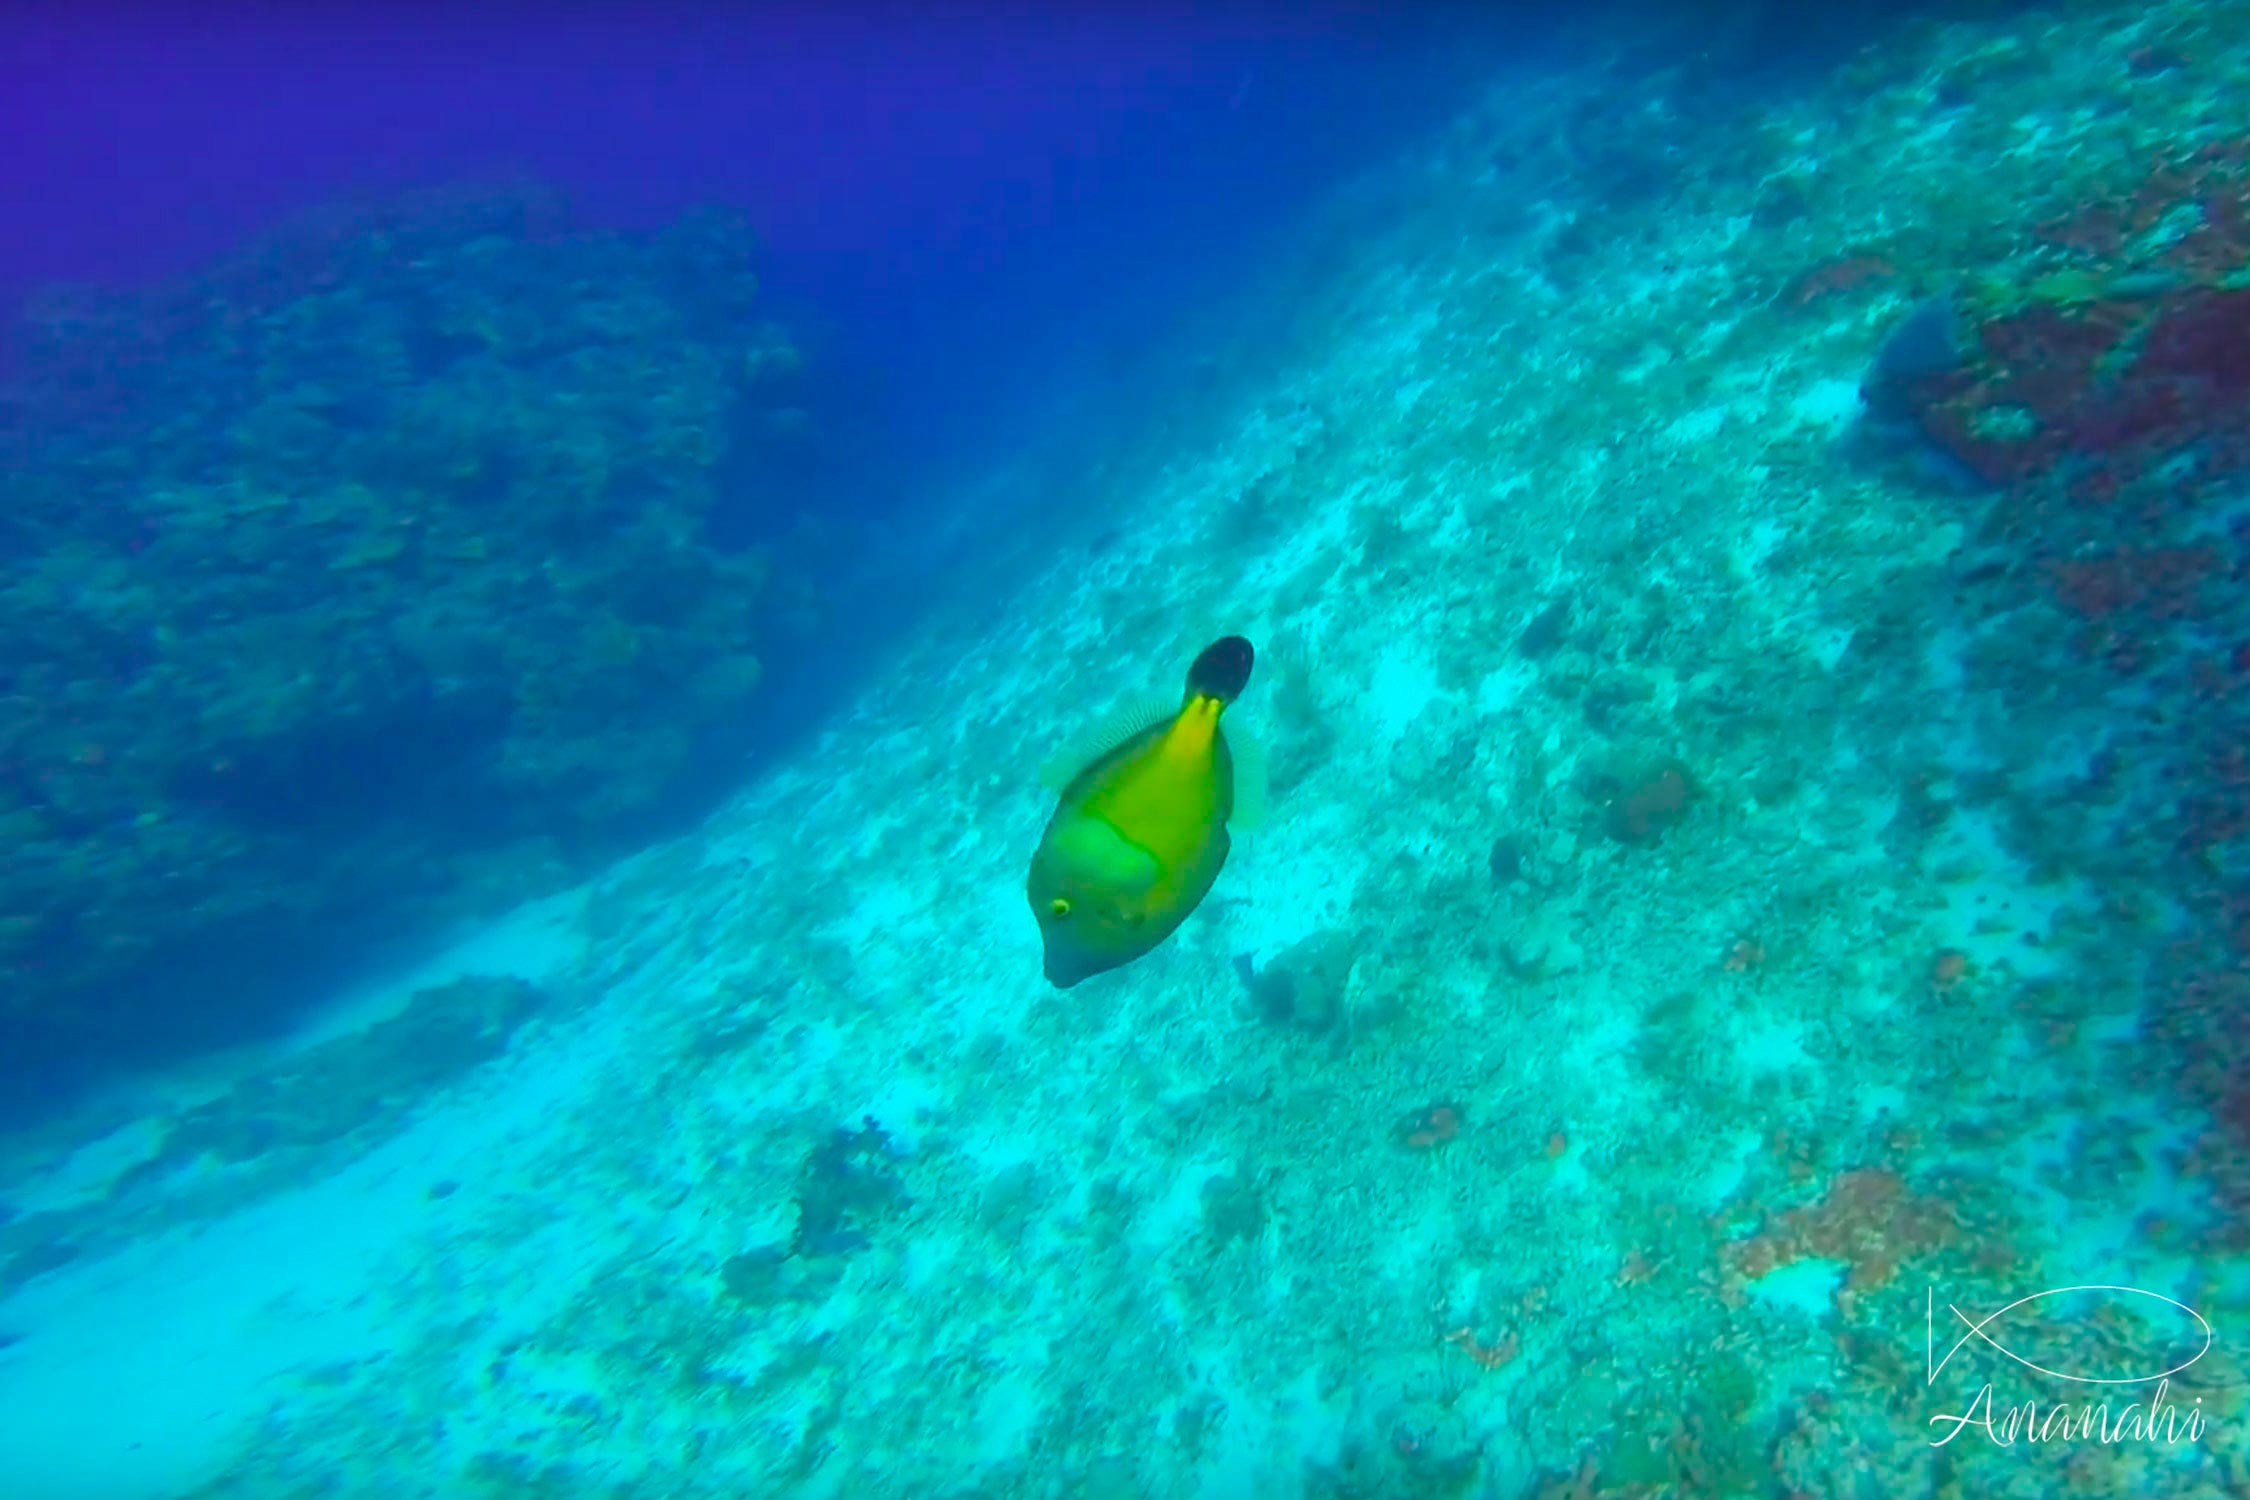 American whitespotted filefish of Mexico